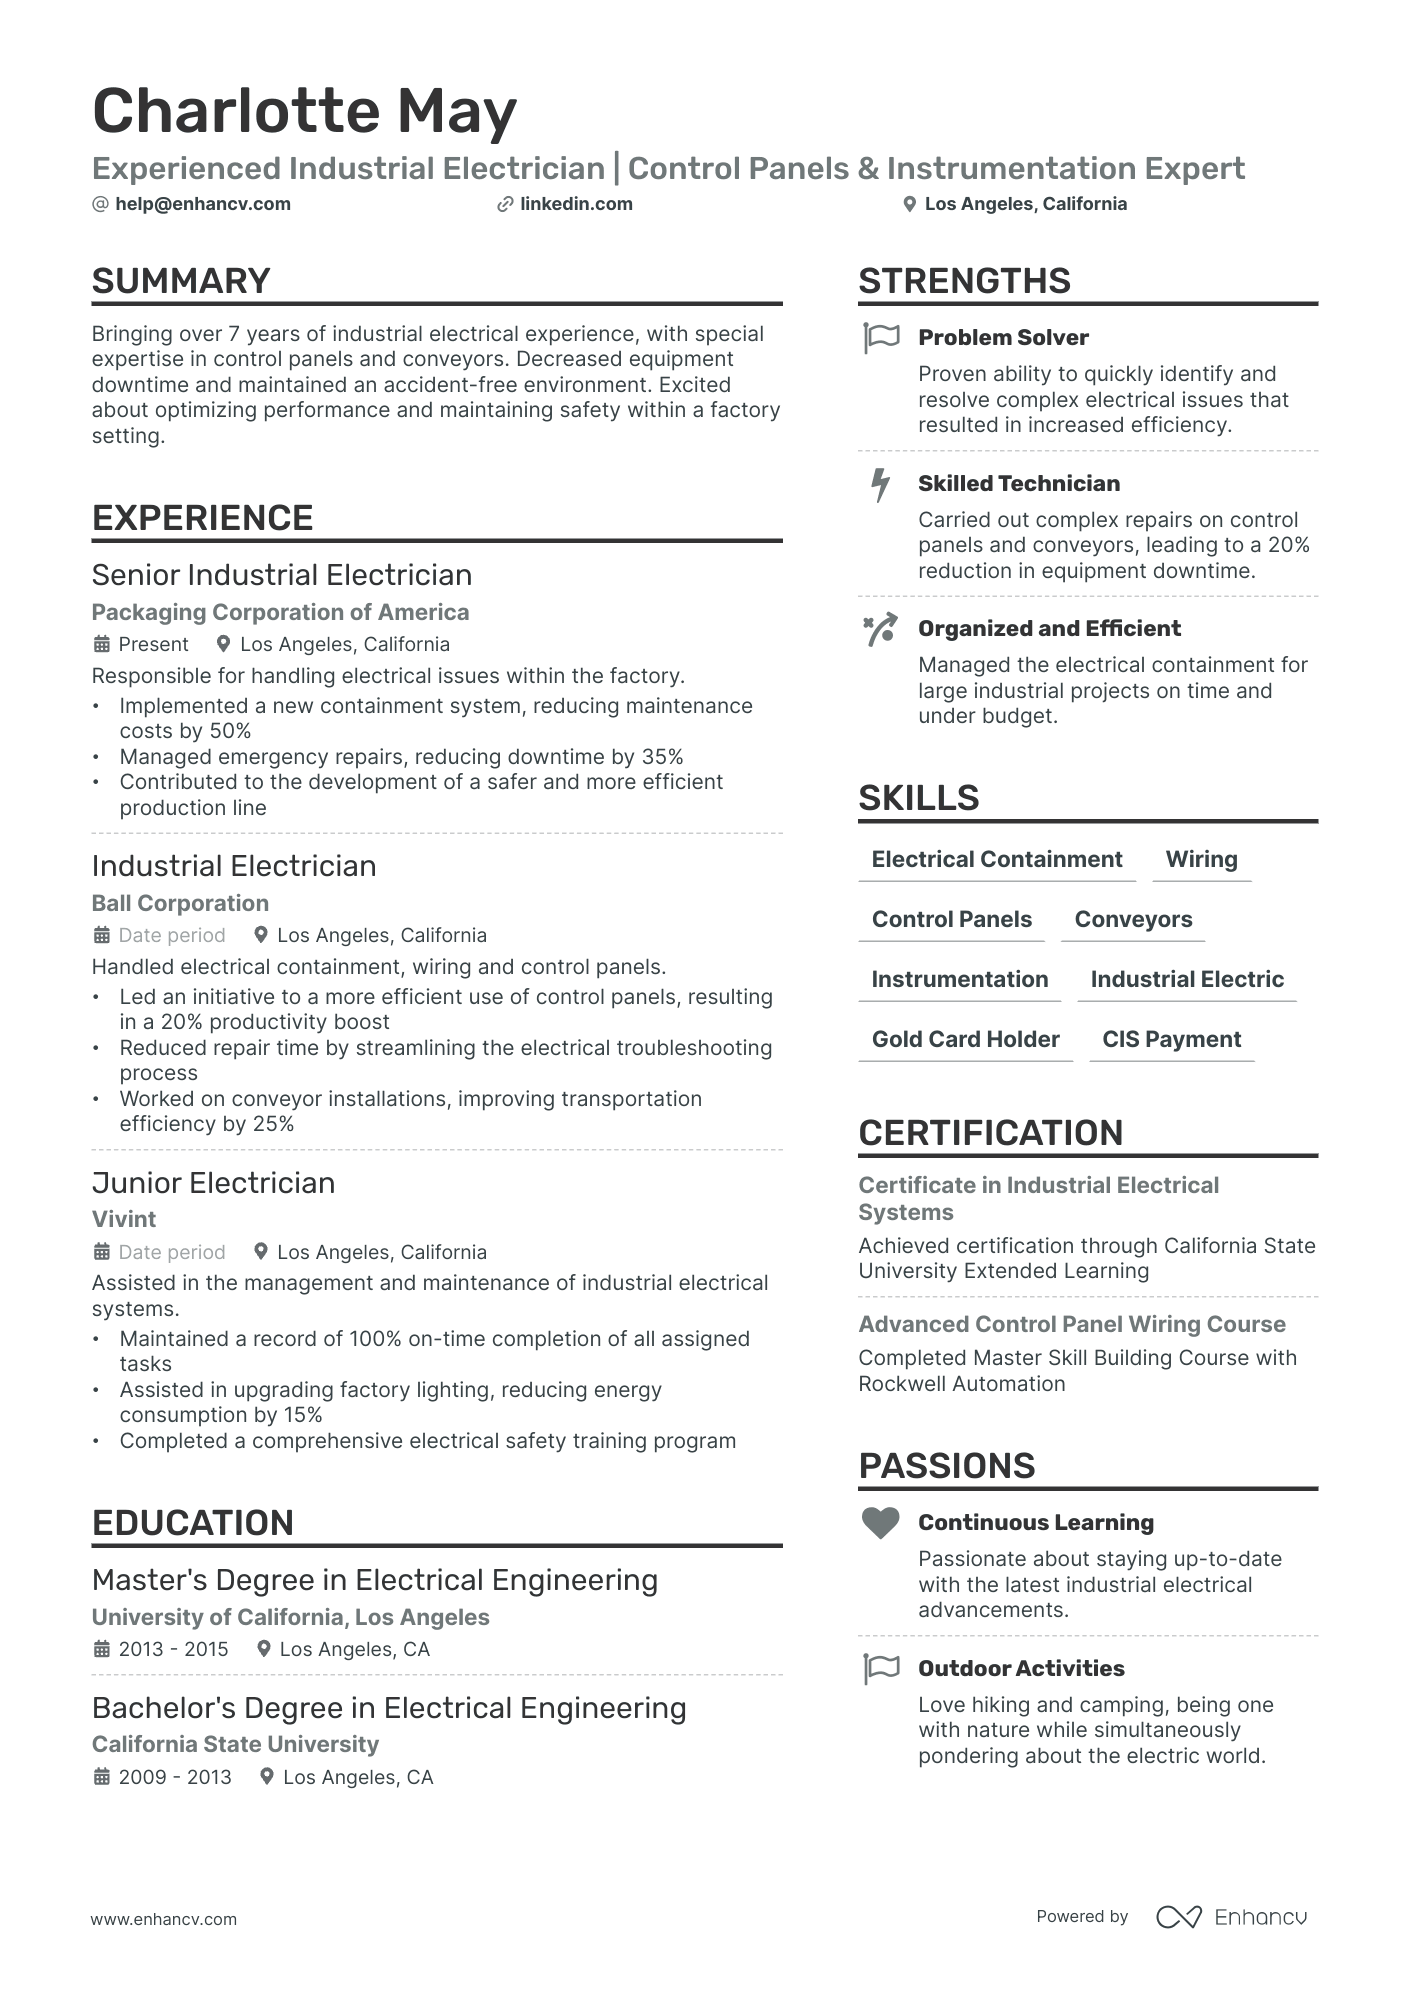 summary for resume electrician